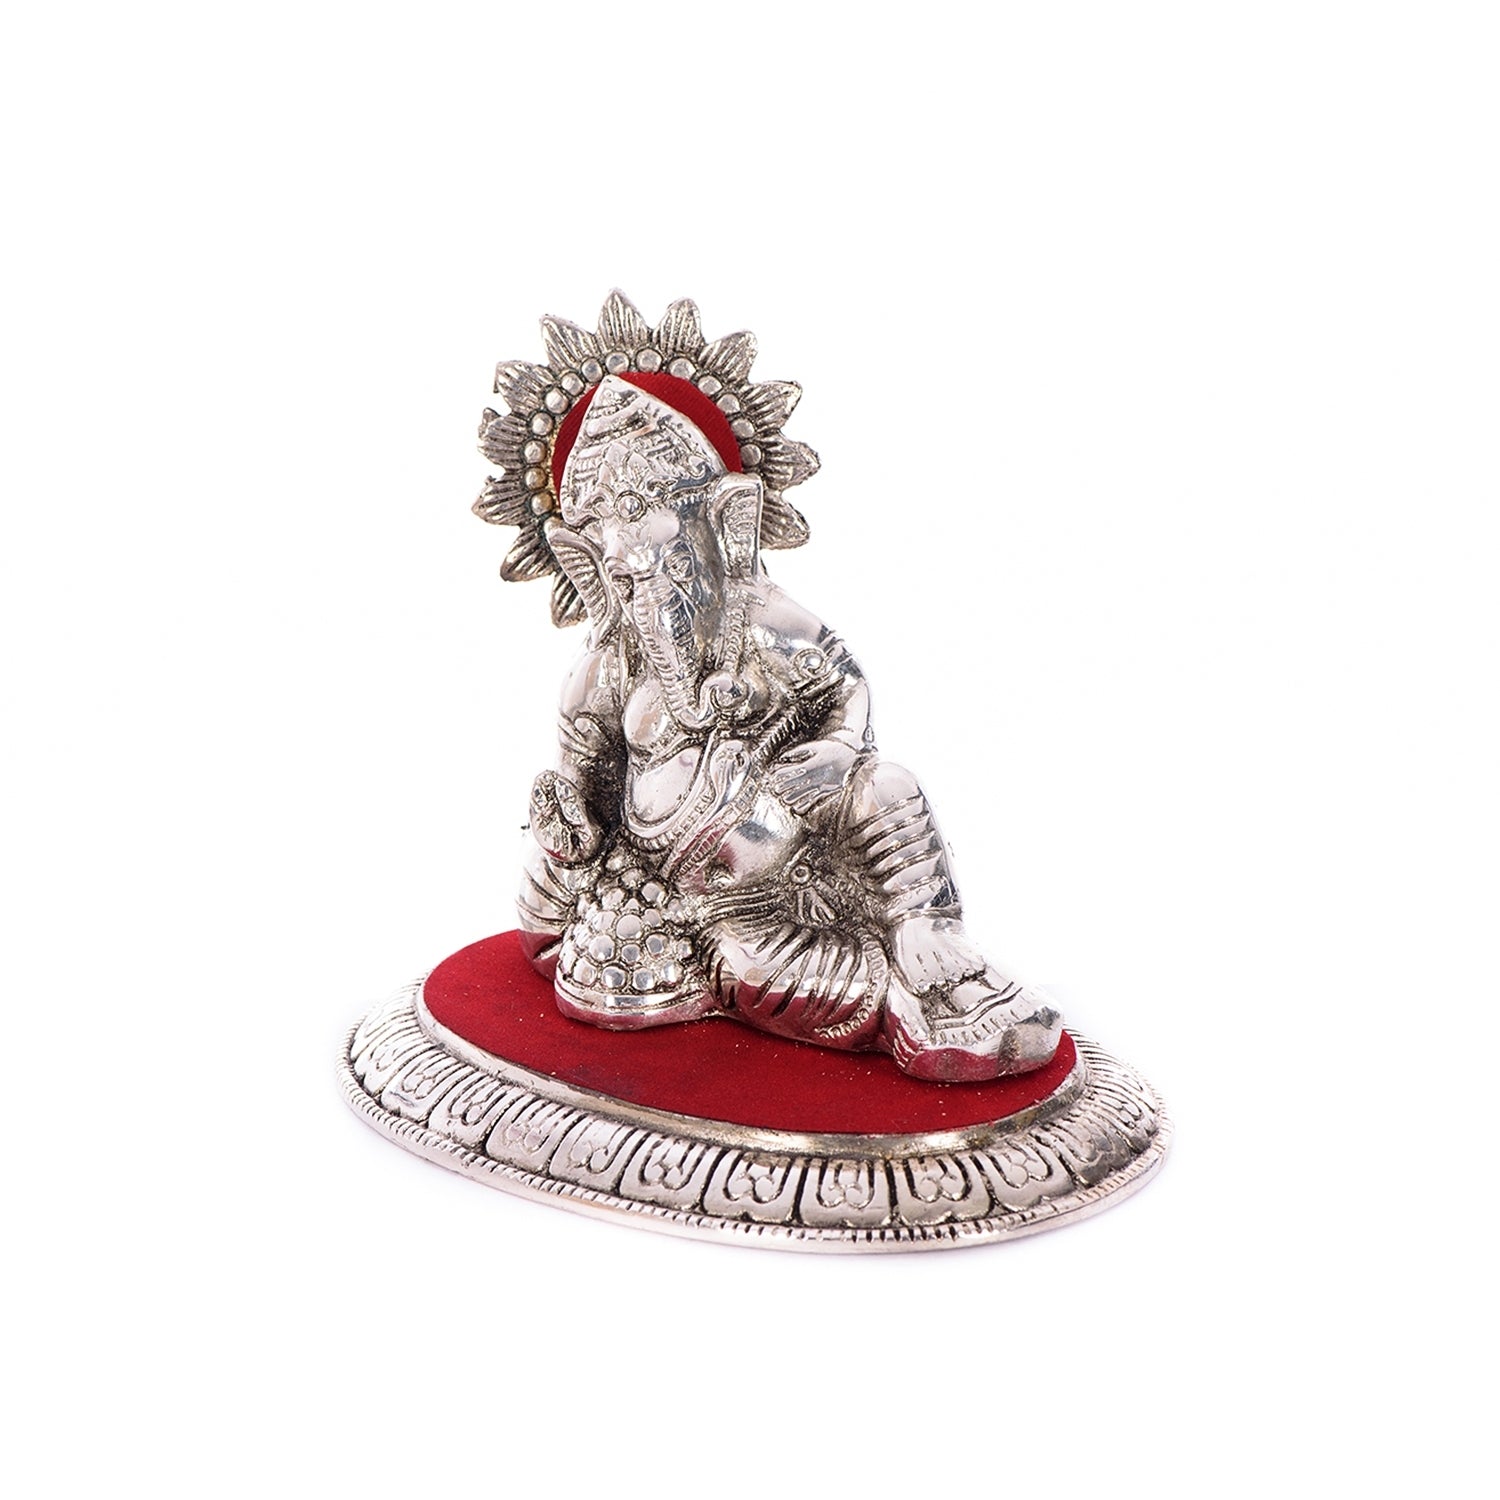 White Metal Silver and Red Lord Ganesha Idol 4